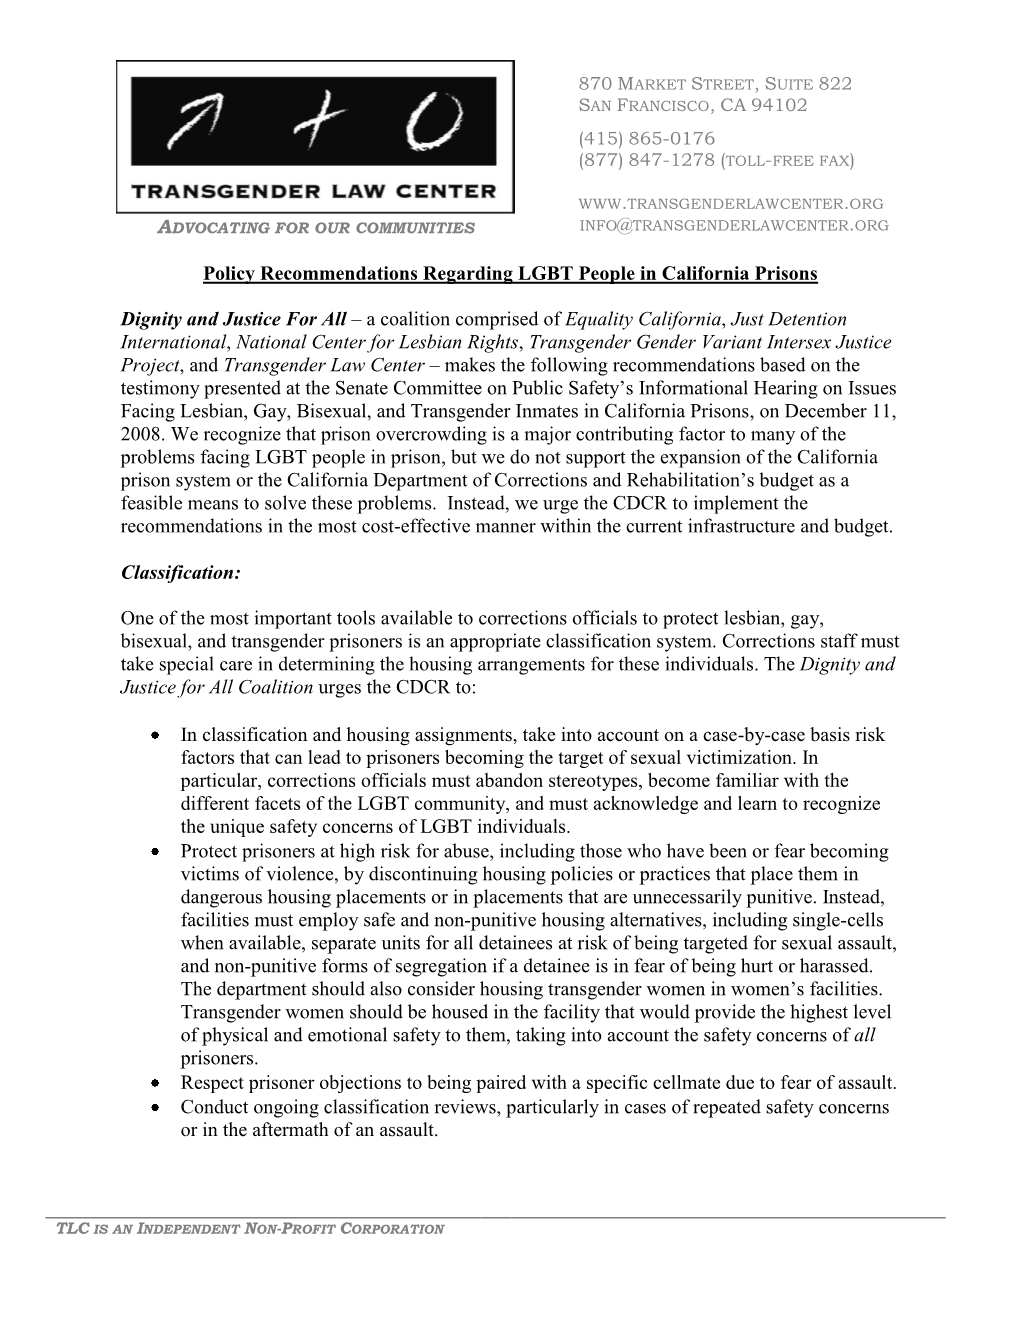 Policy Recommendations Regarding LGBT People in Prison